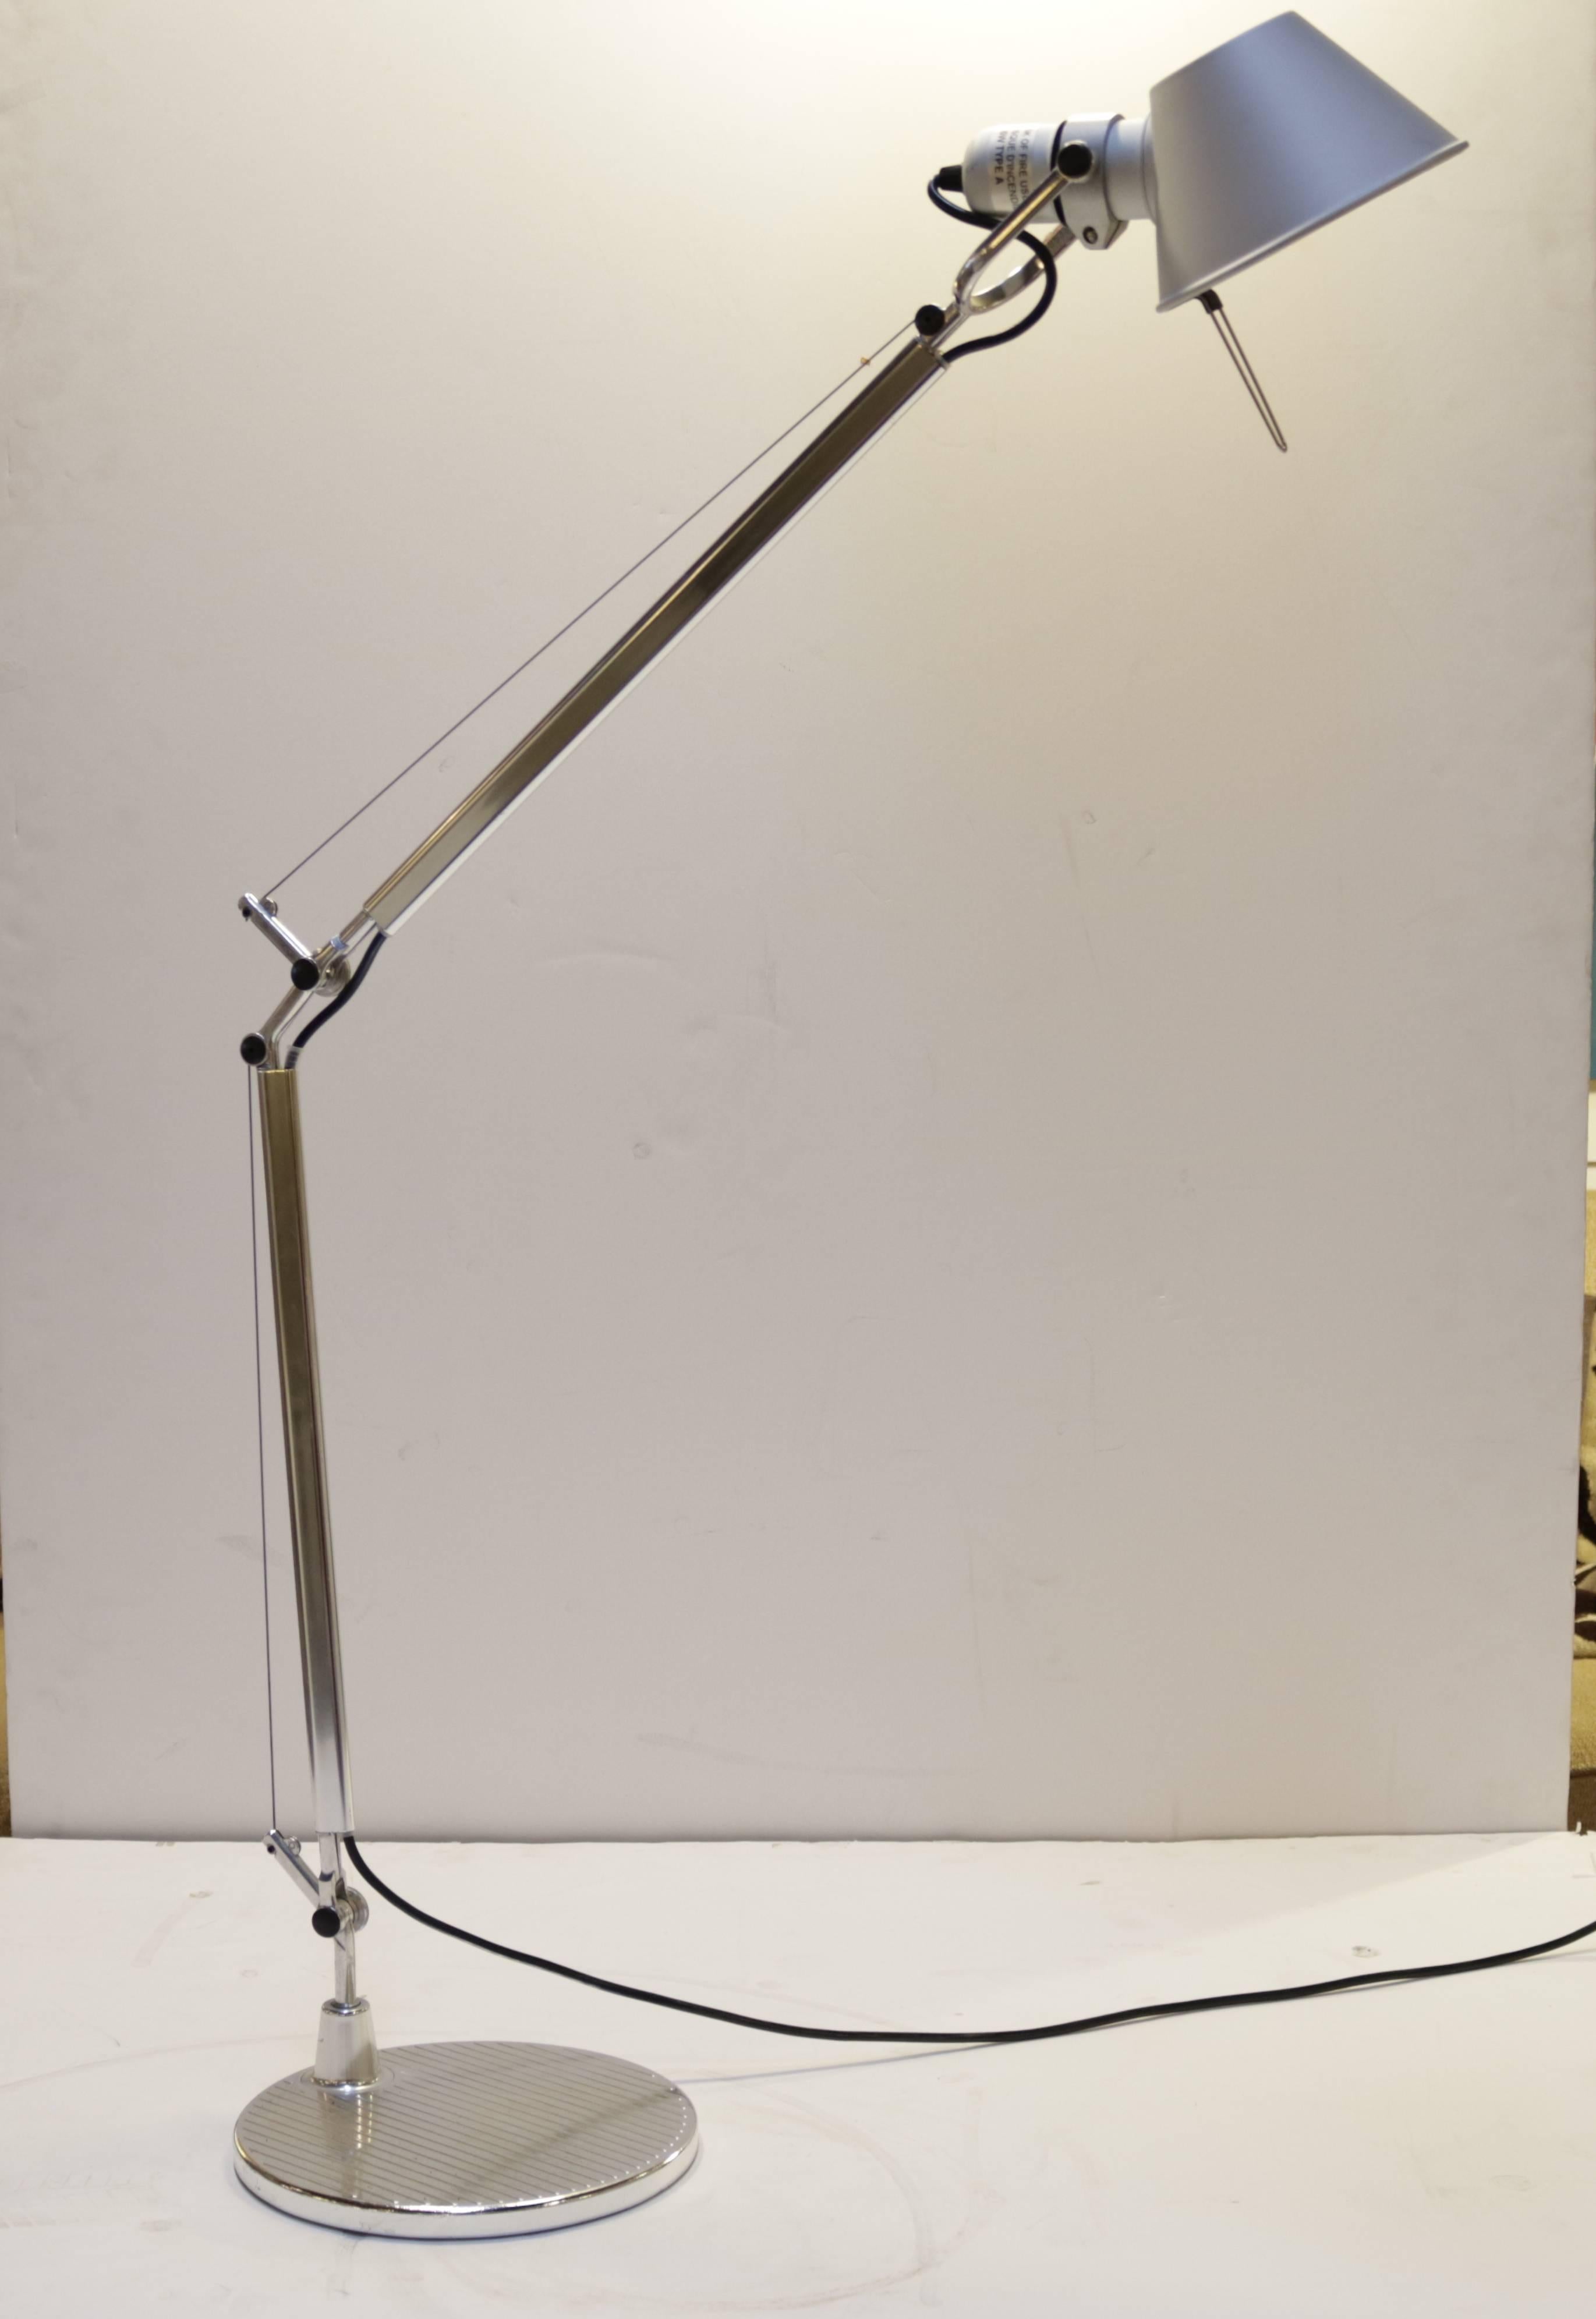 Designed by Italian designer Michele De Lucchi in 1987, this stream-lined desk or floor reading lamp won the Compasso D'Oro Industrial Design award in 1989. It is die-cast aluminium with steel cables.

The shade measures 5.75